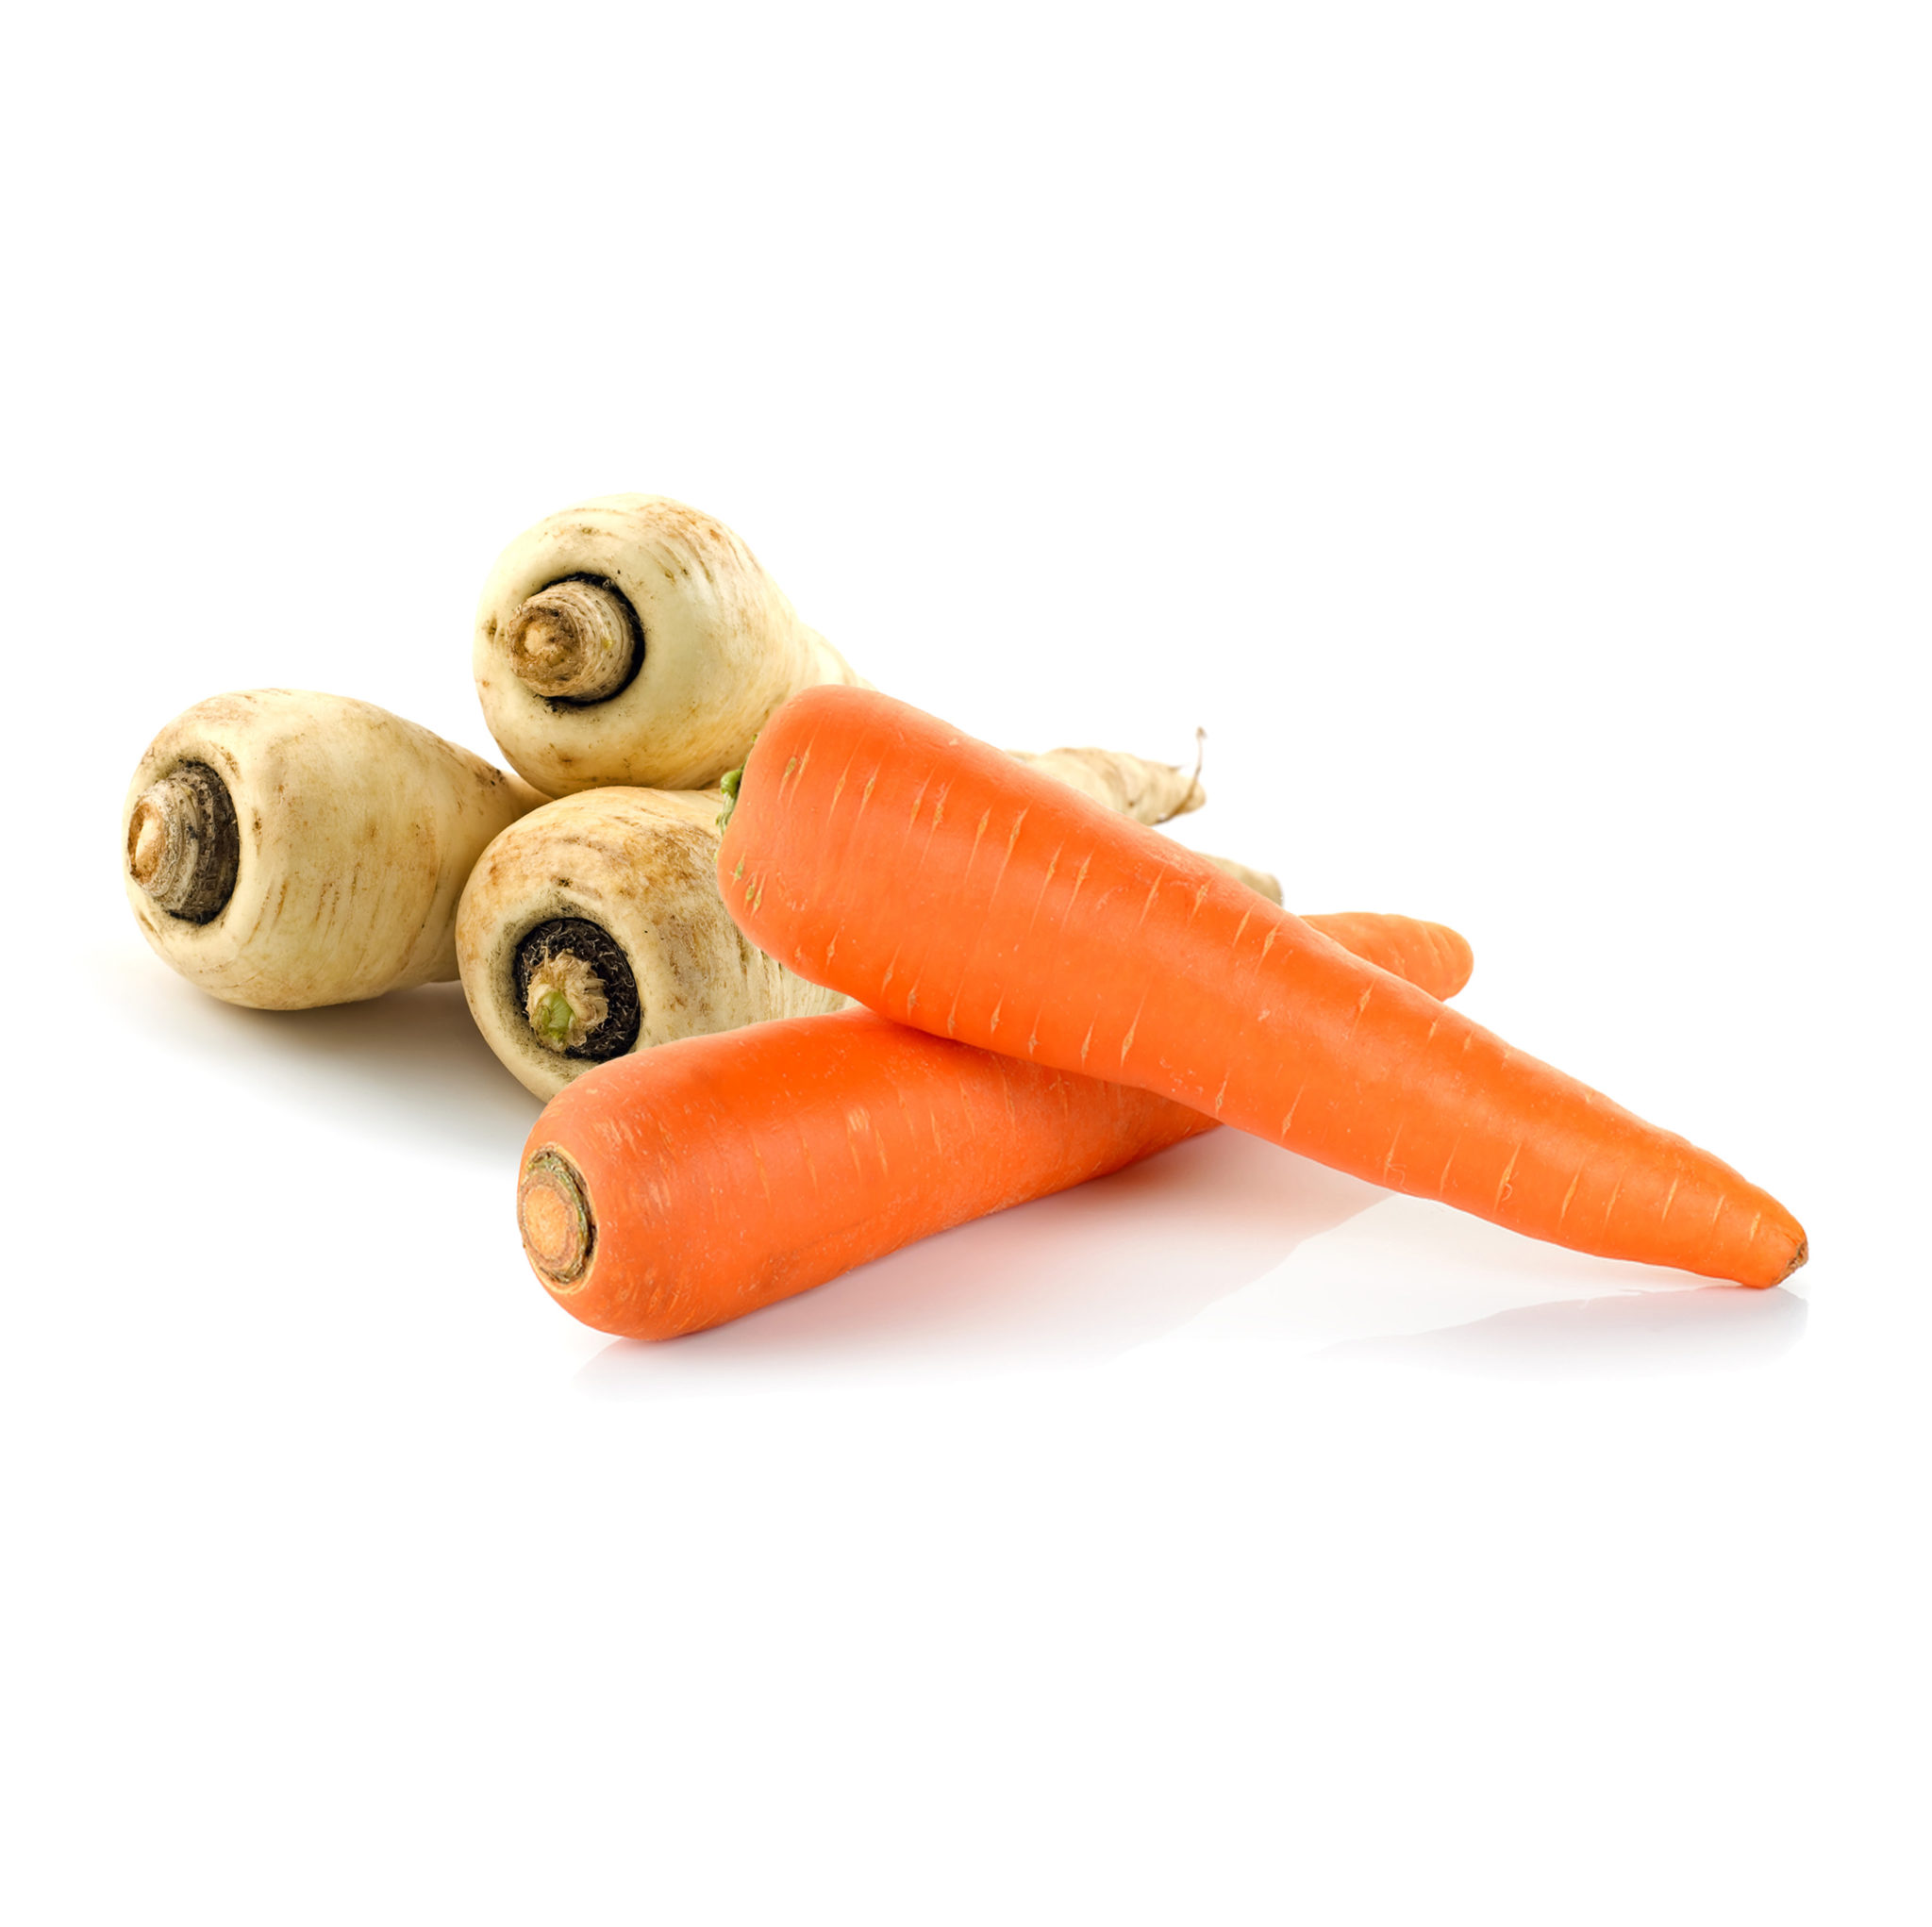 Carrots and longitudinal root vegetables